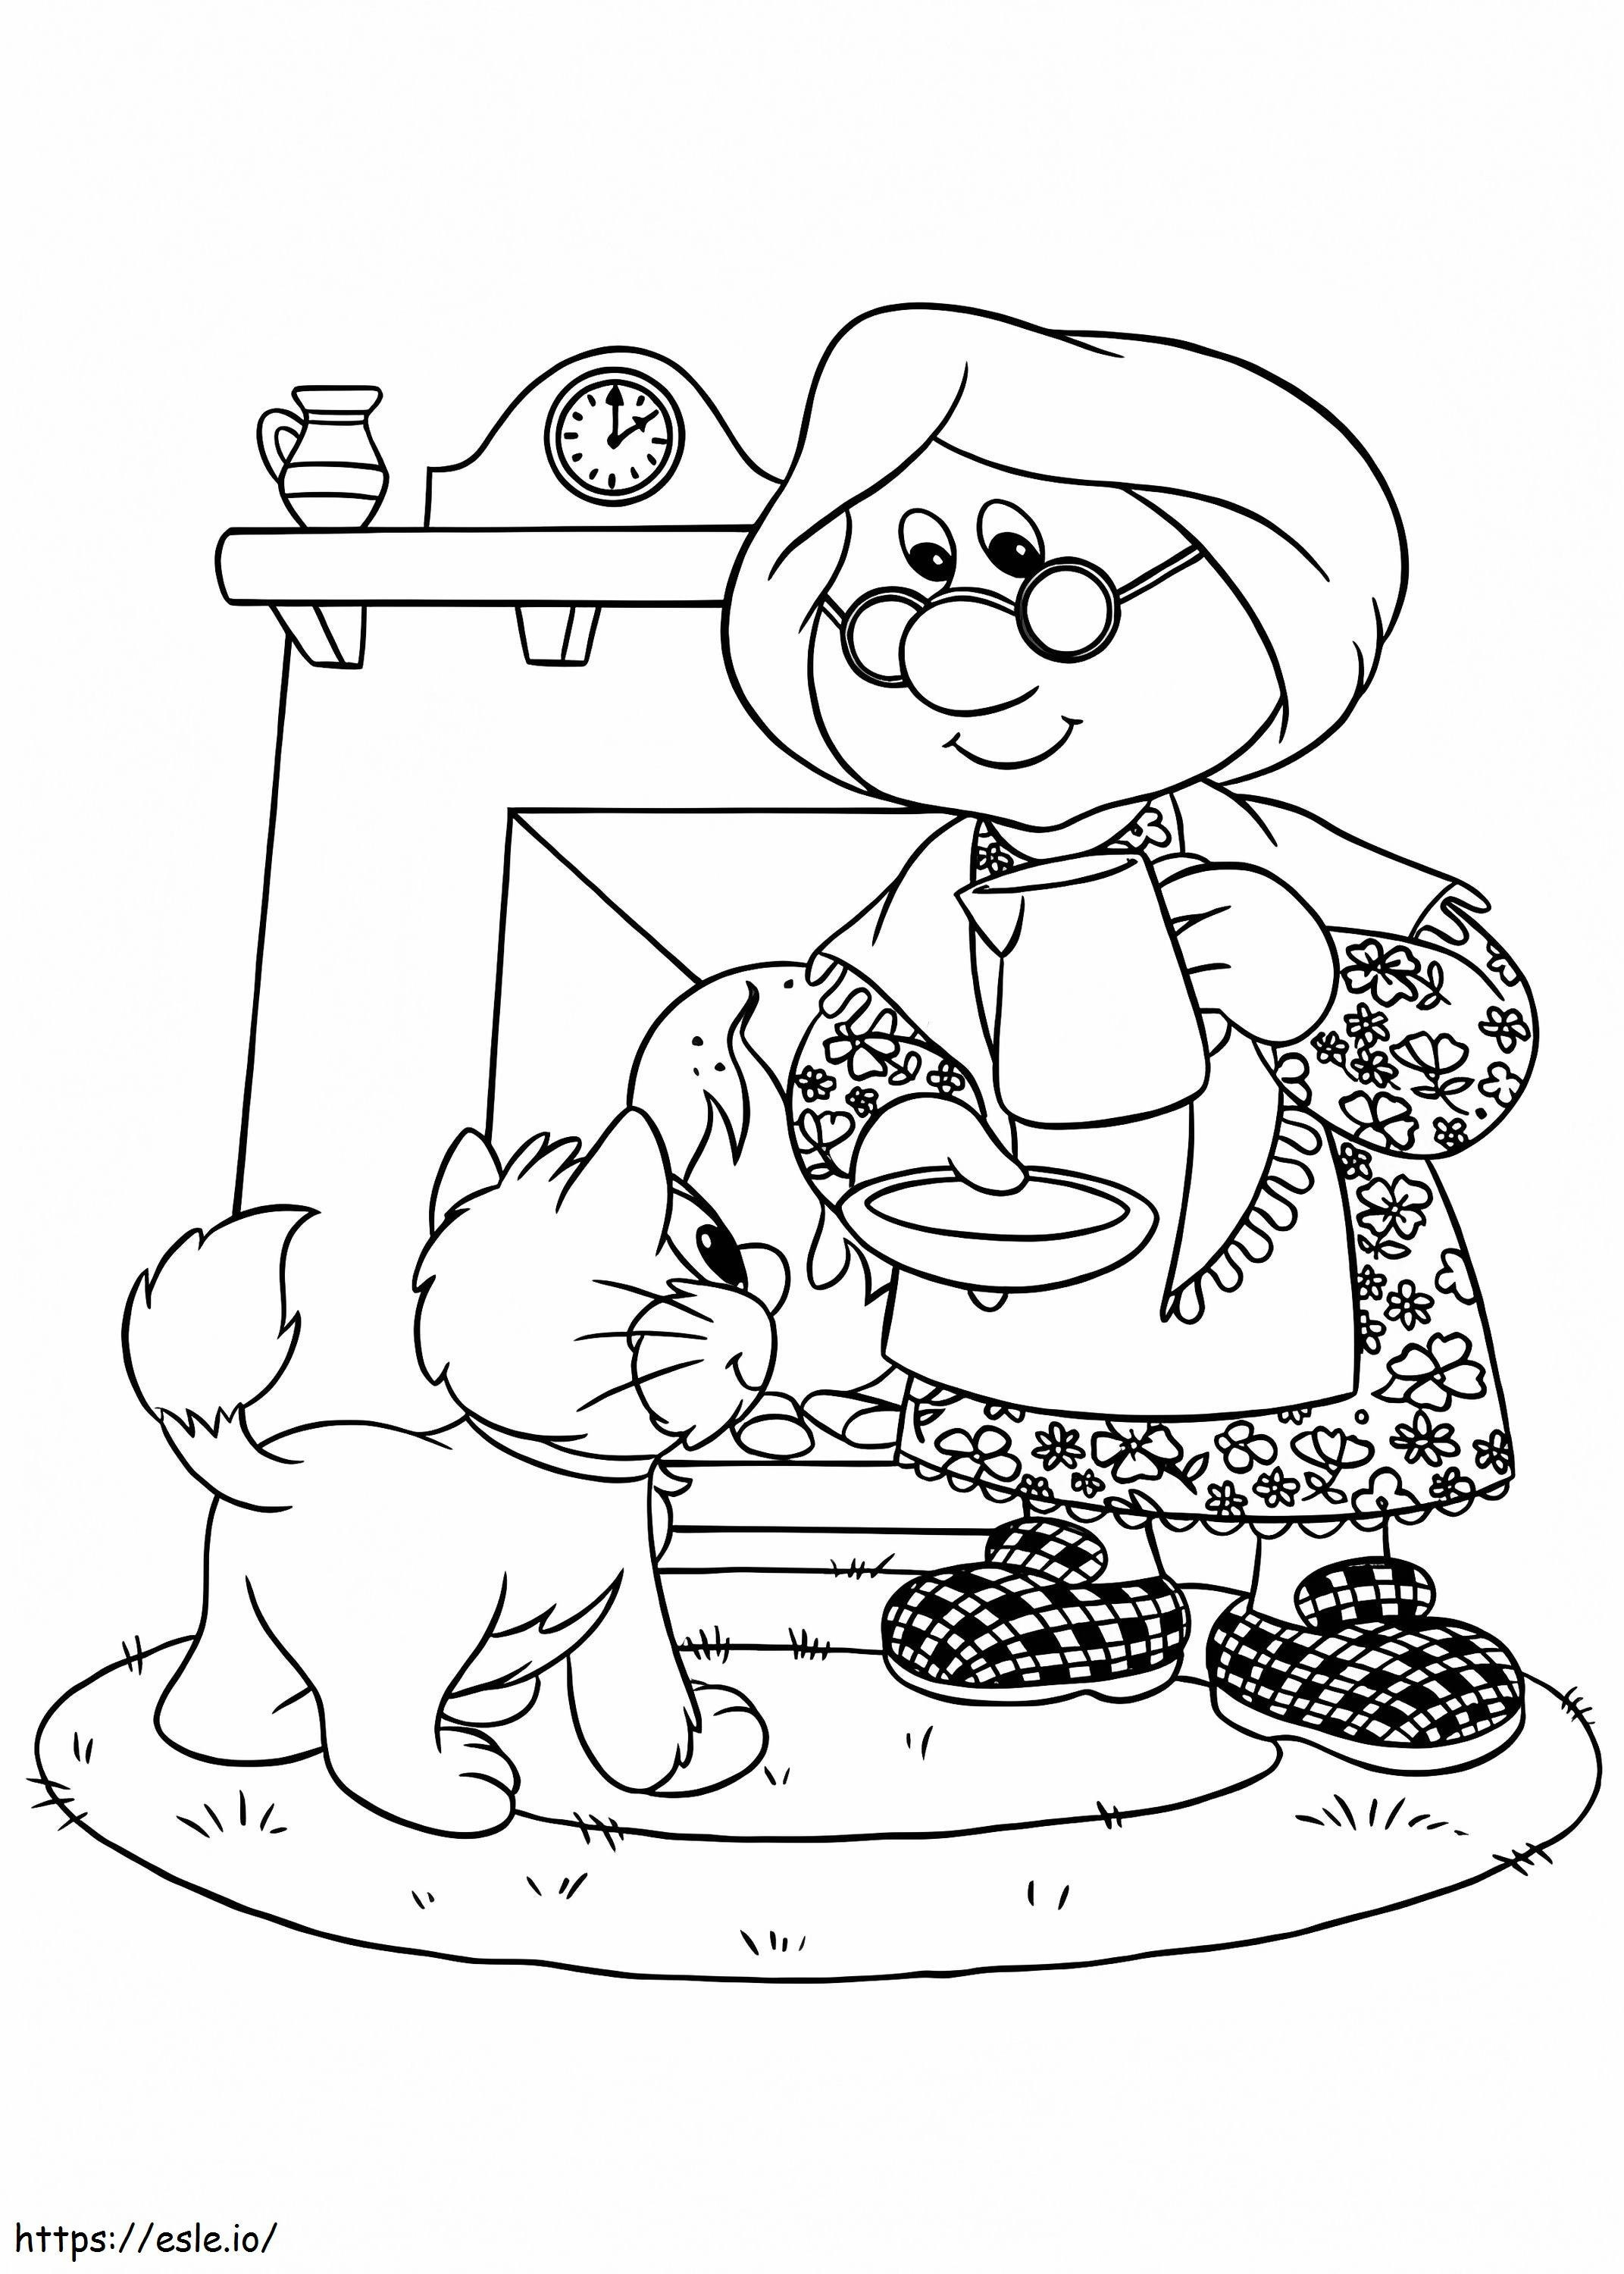 Postman Pat'S Wife And Cat coloring page